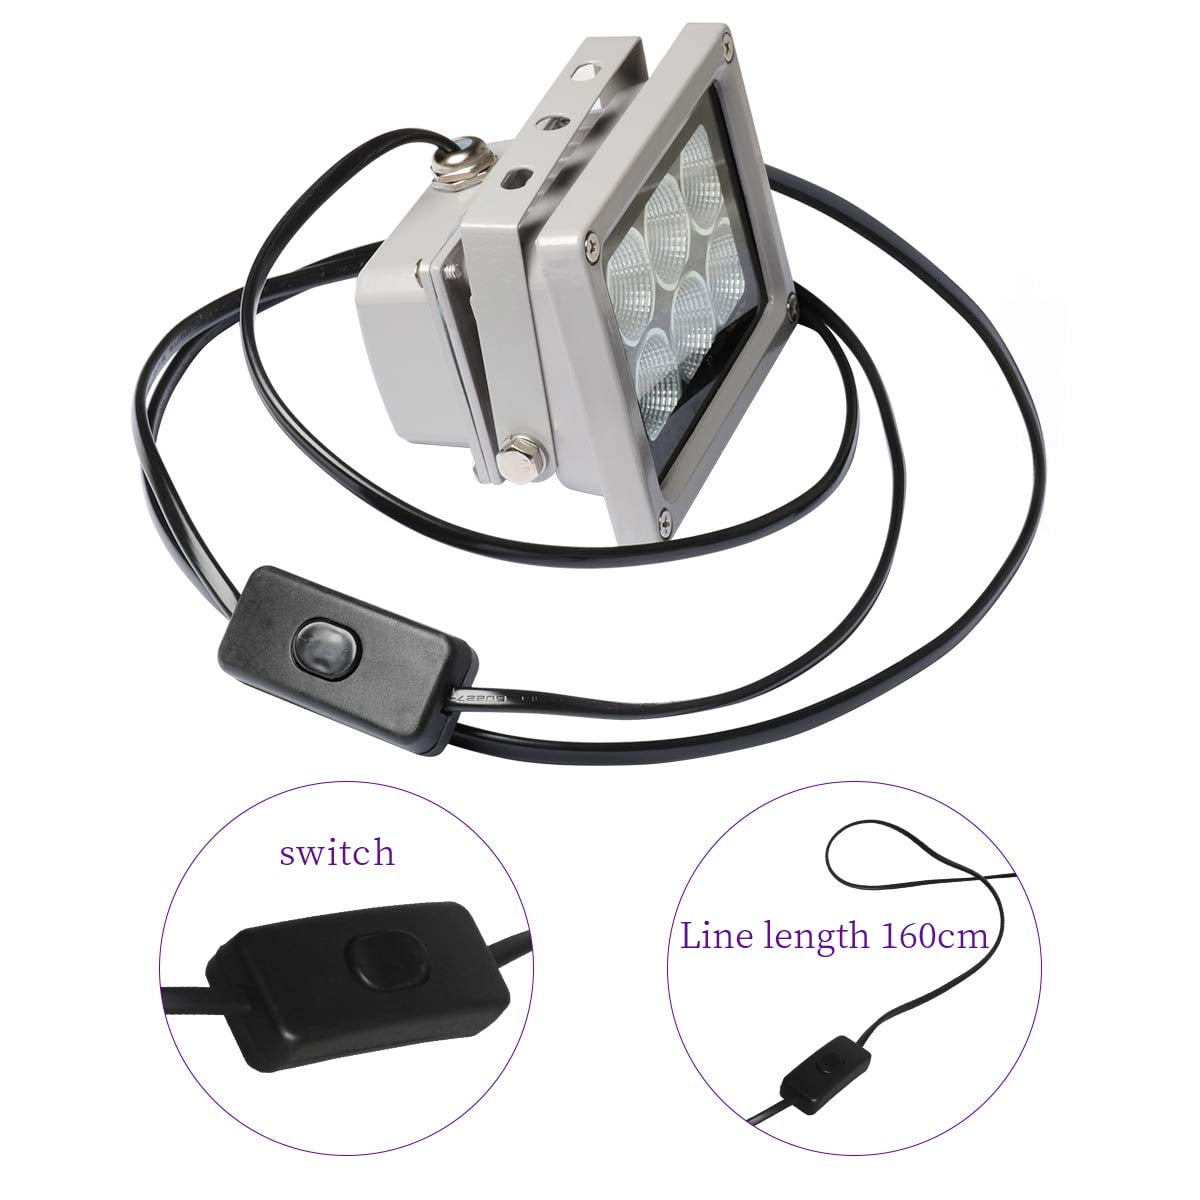 AC90 240V 200W 560nw/Cm2 UV LED Resin Curing Light Lamp For SLA DLP 3D  Printer Parts From Mmuse3d, $60.31